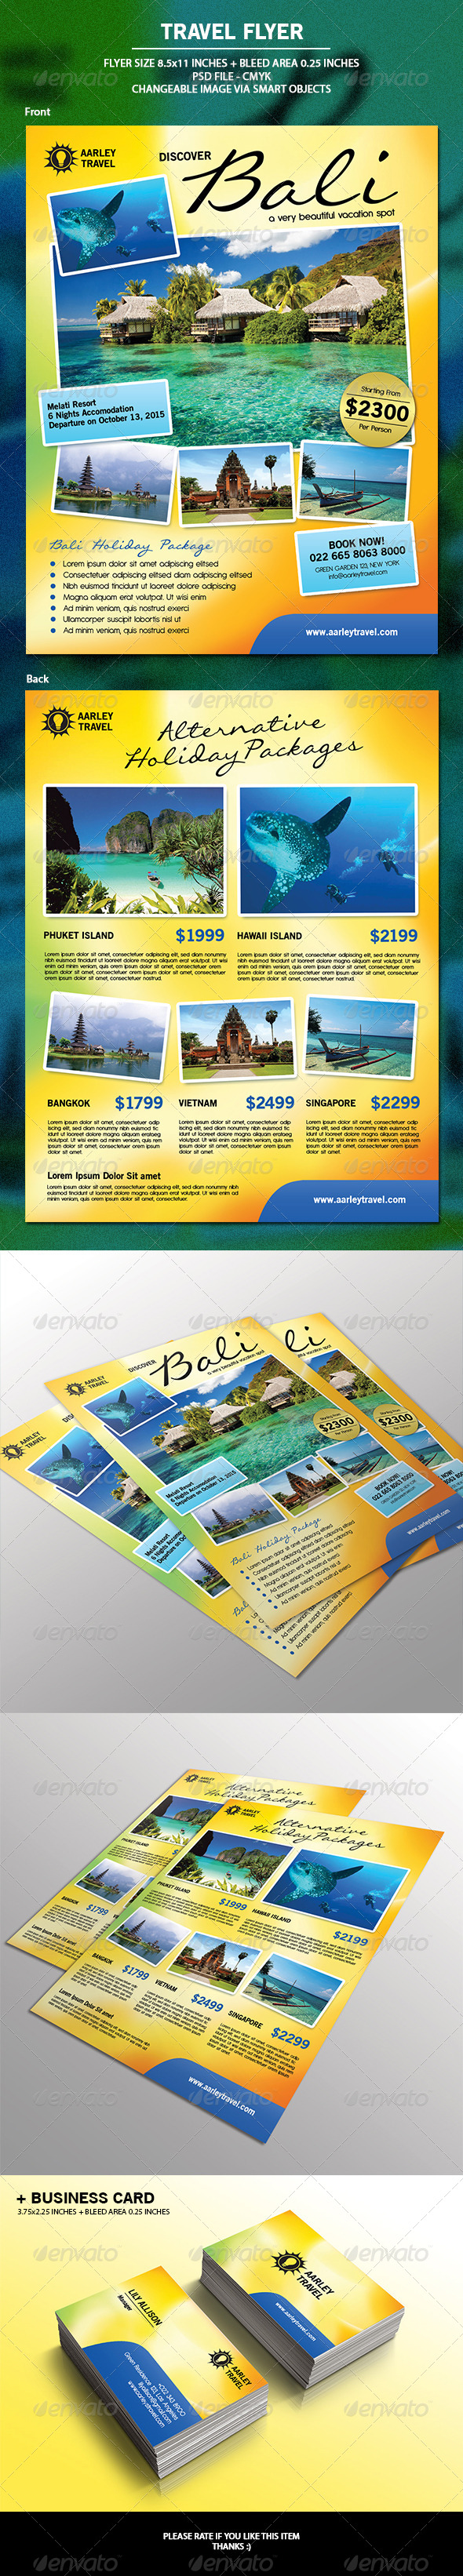  Travel Flyer + Business Card 